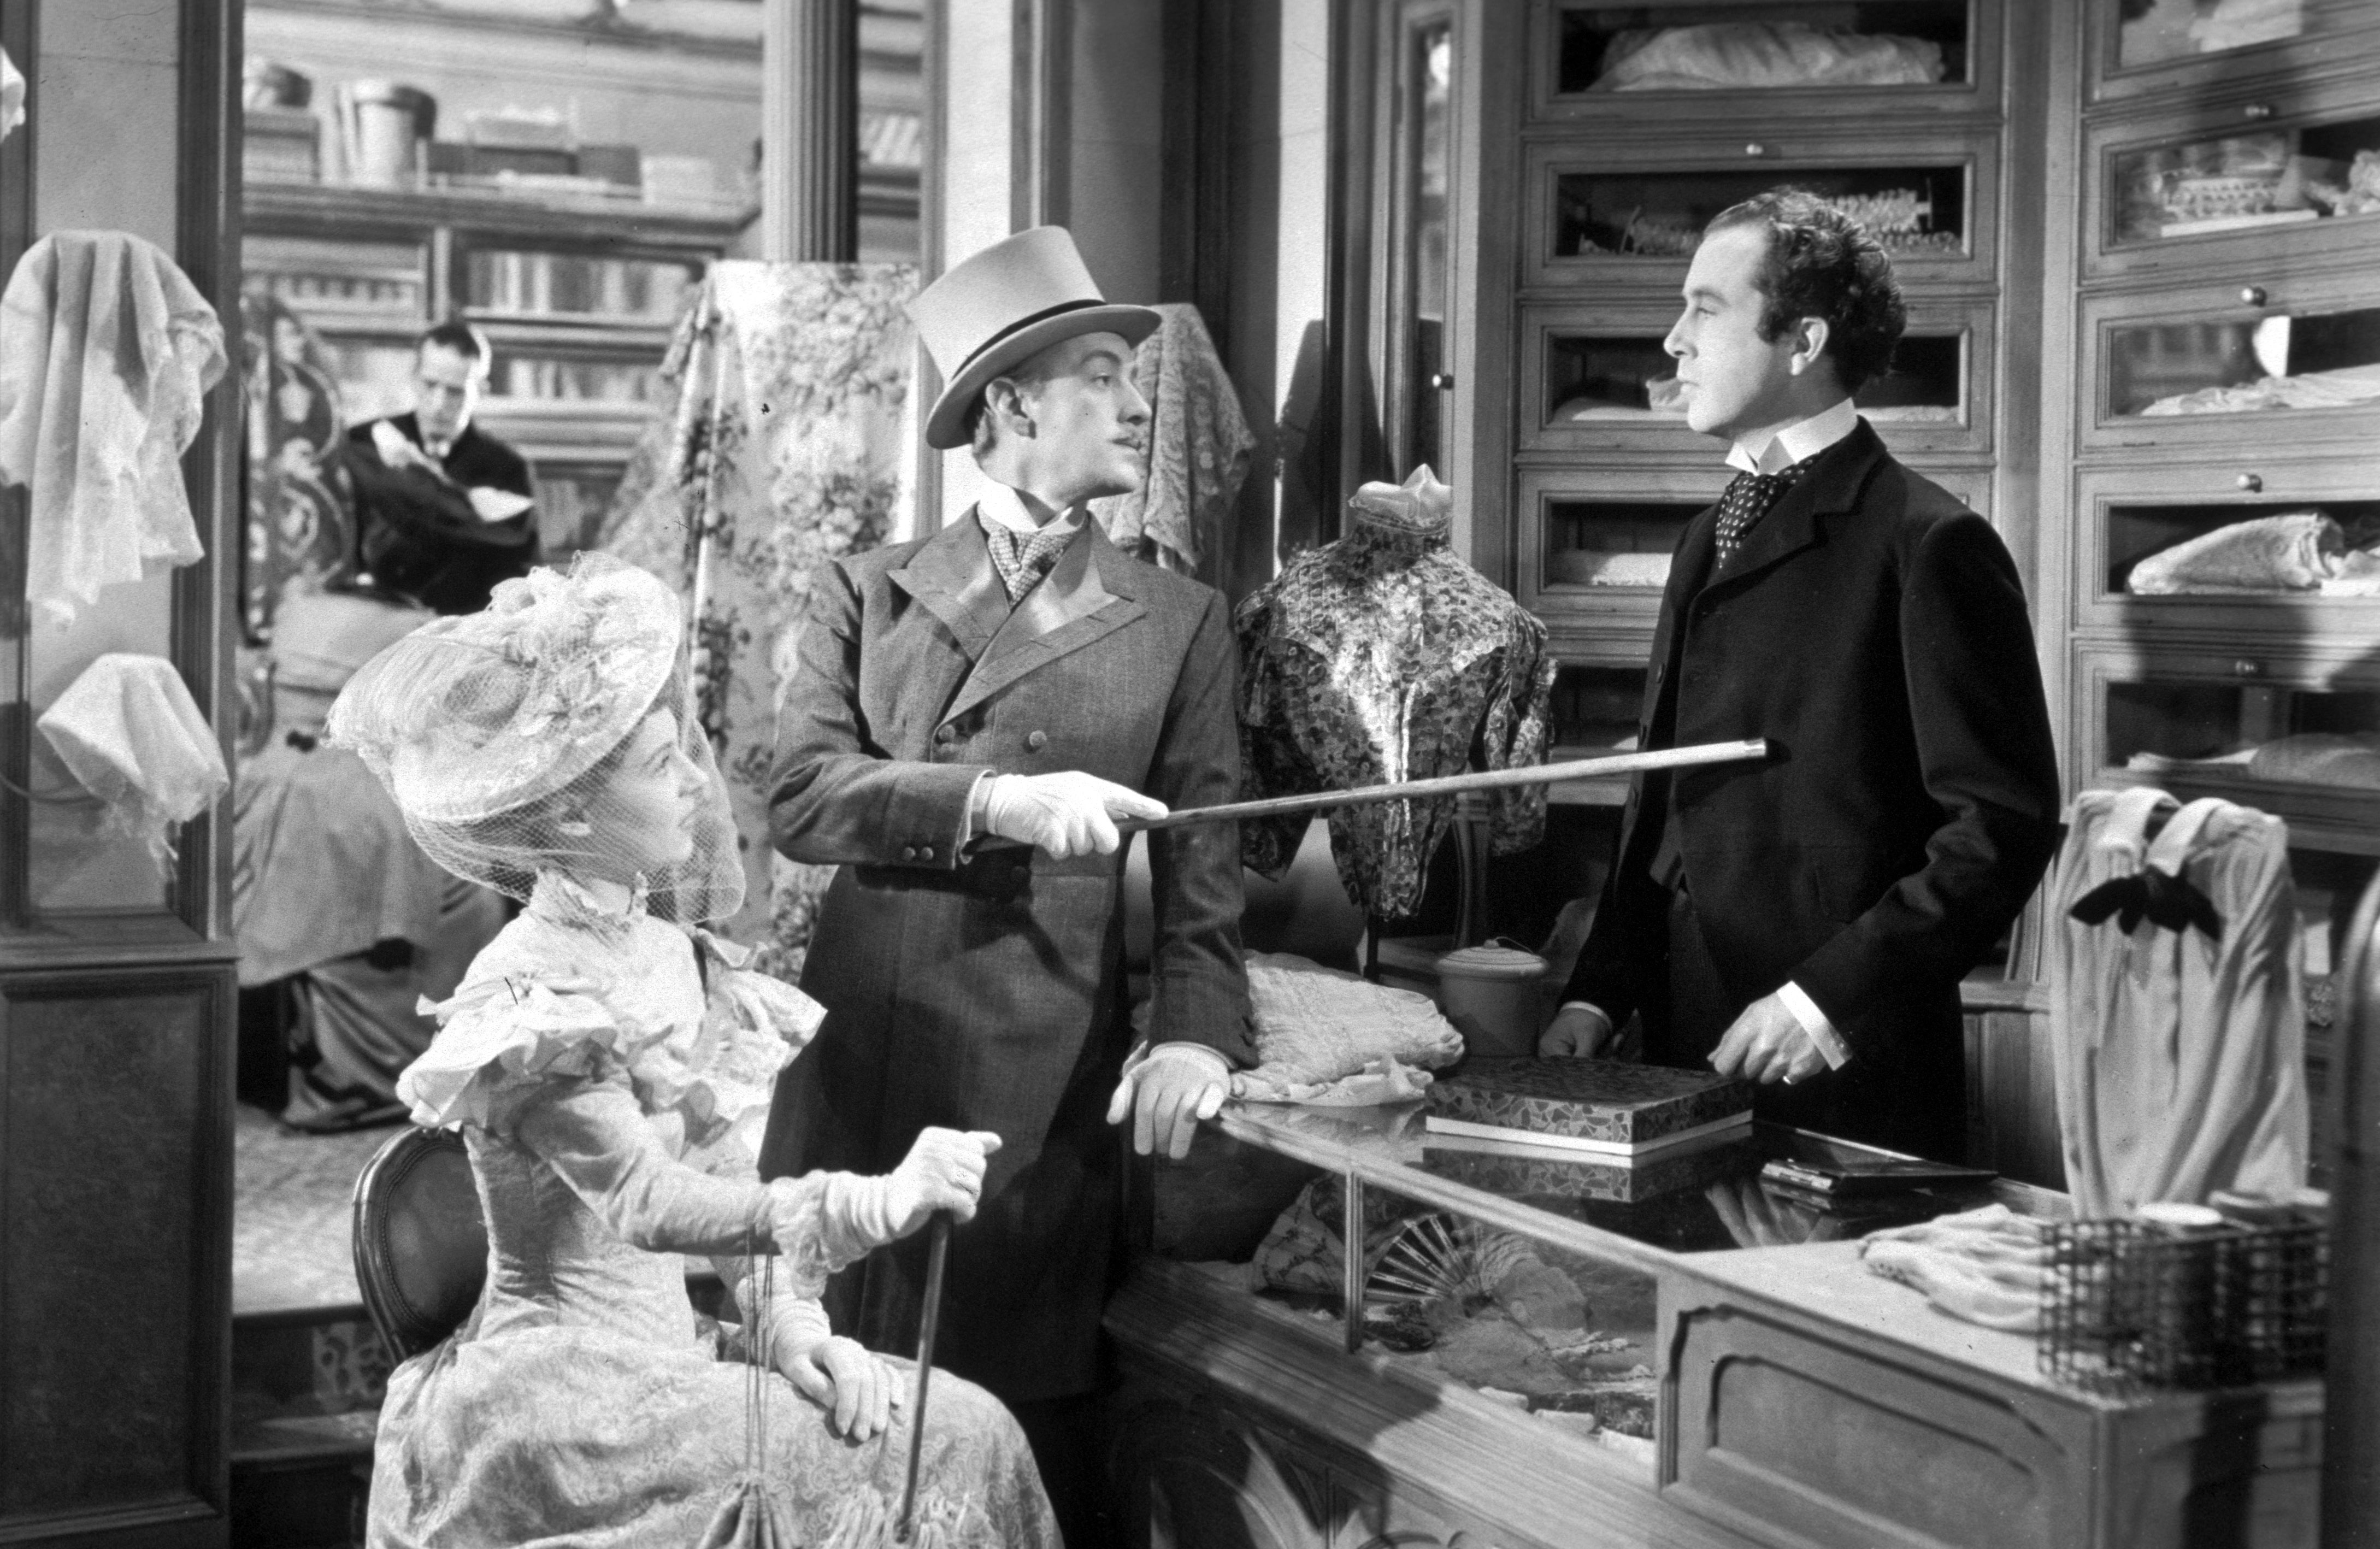 Alec Guinness, Dennis Price, and Anne Valery in Kind Hearts and Coronets (1949)